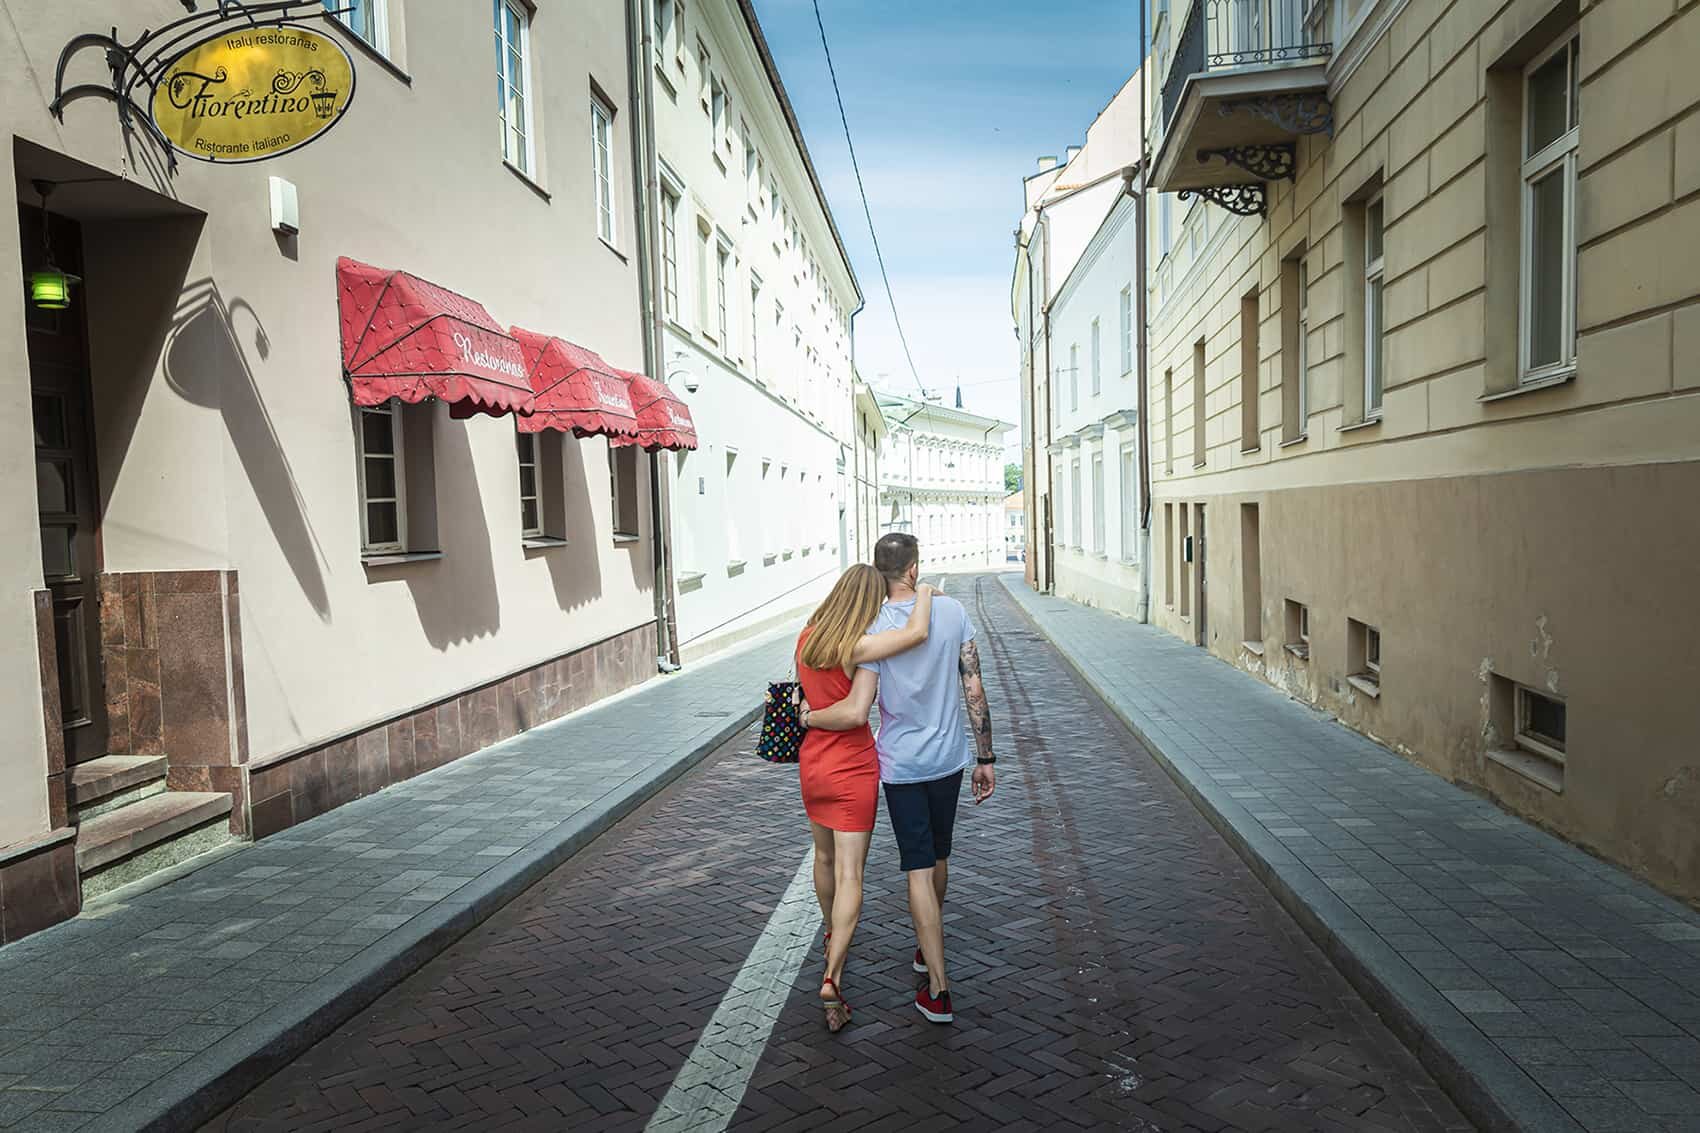 Discover Vilnius with a romantic photoshoot